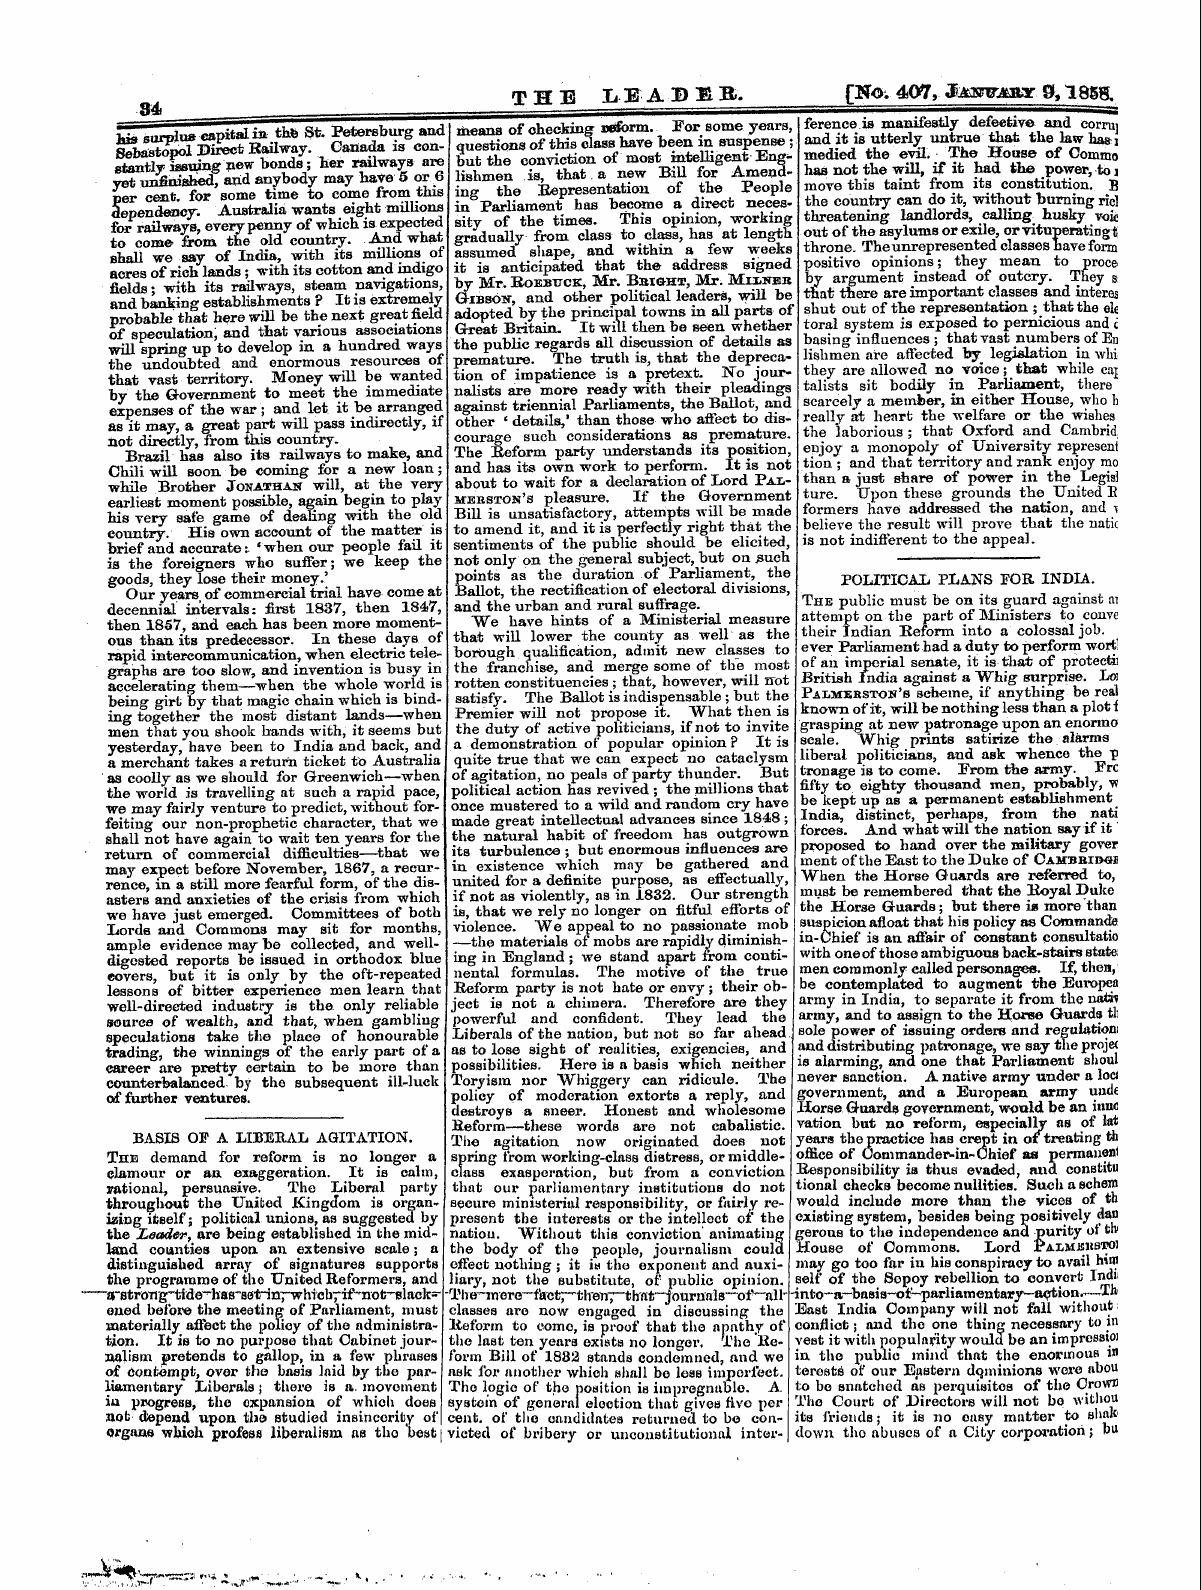 Leader (1850-1860): jS F Y, 1st edition: 10